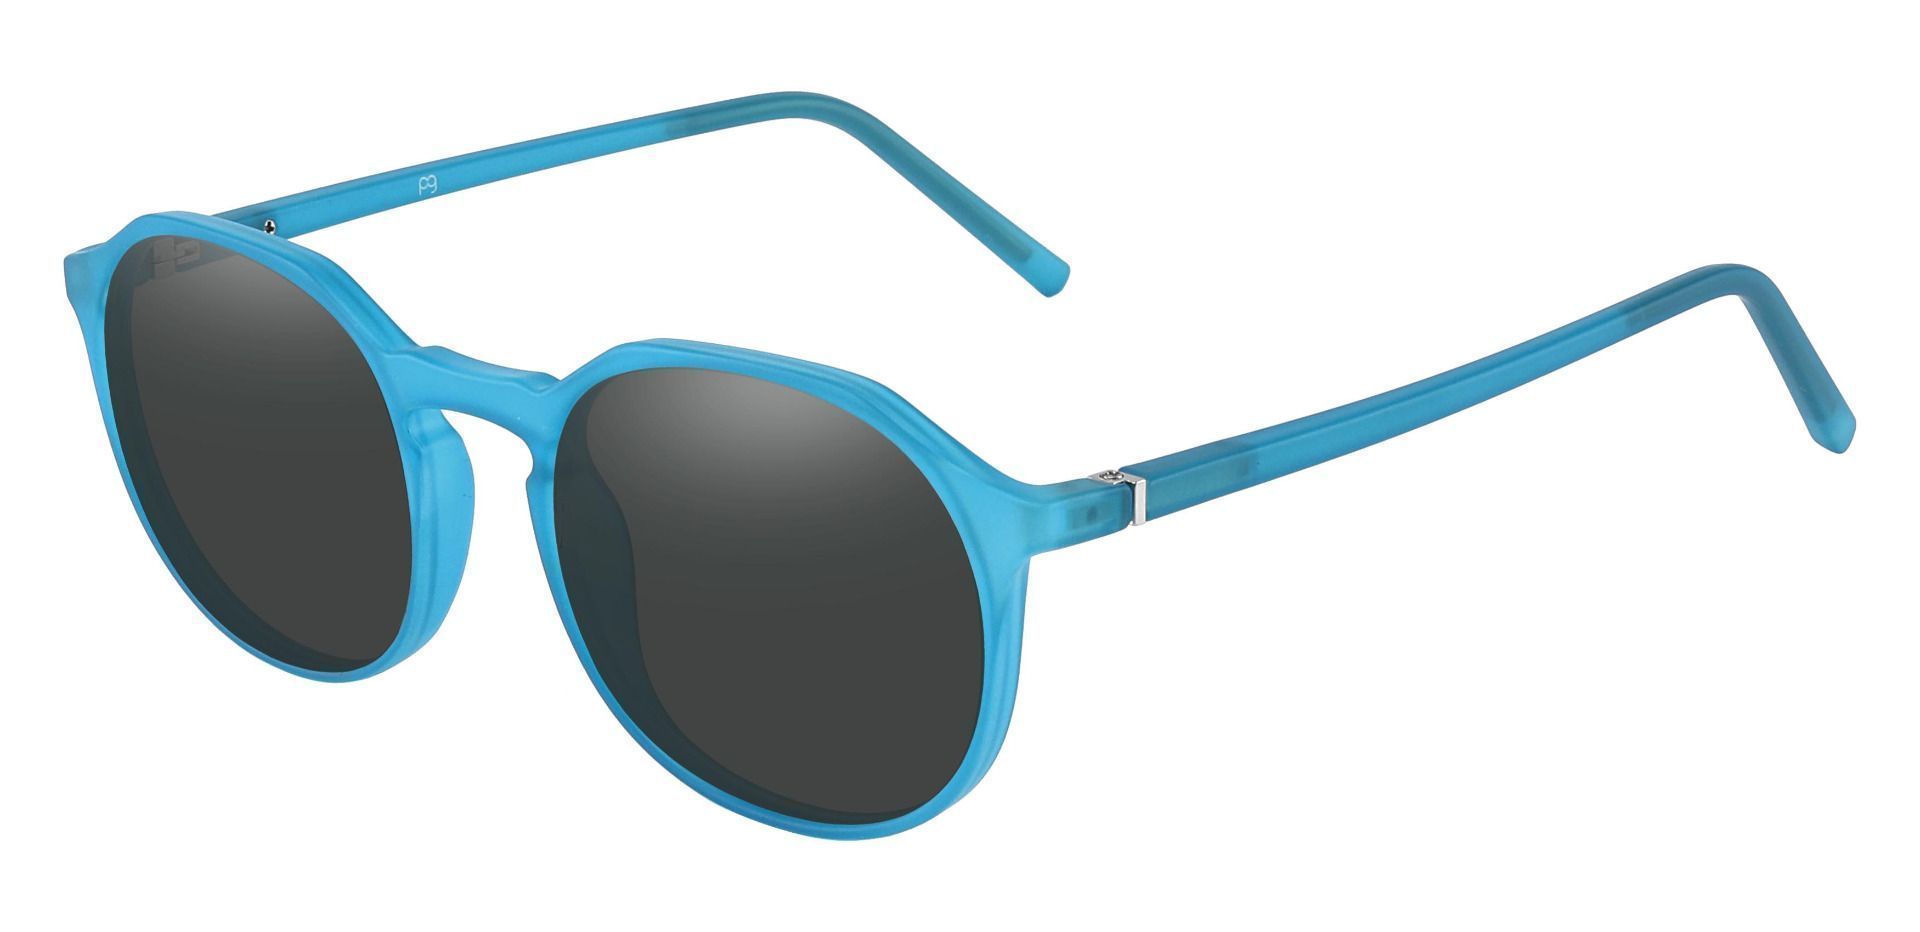 Belvidere Geometric Lined Bifocal Sunglasses - Blue Frame With Gray Lenses